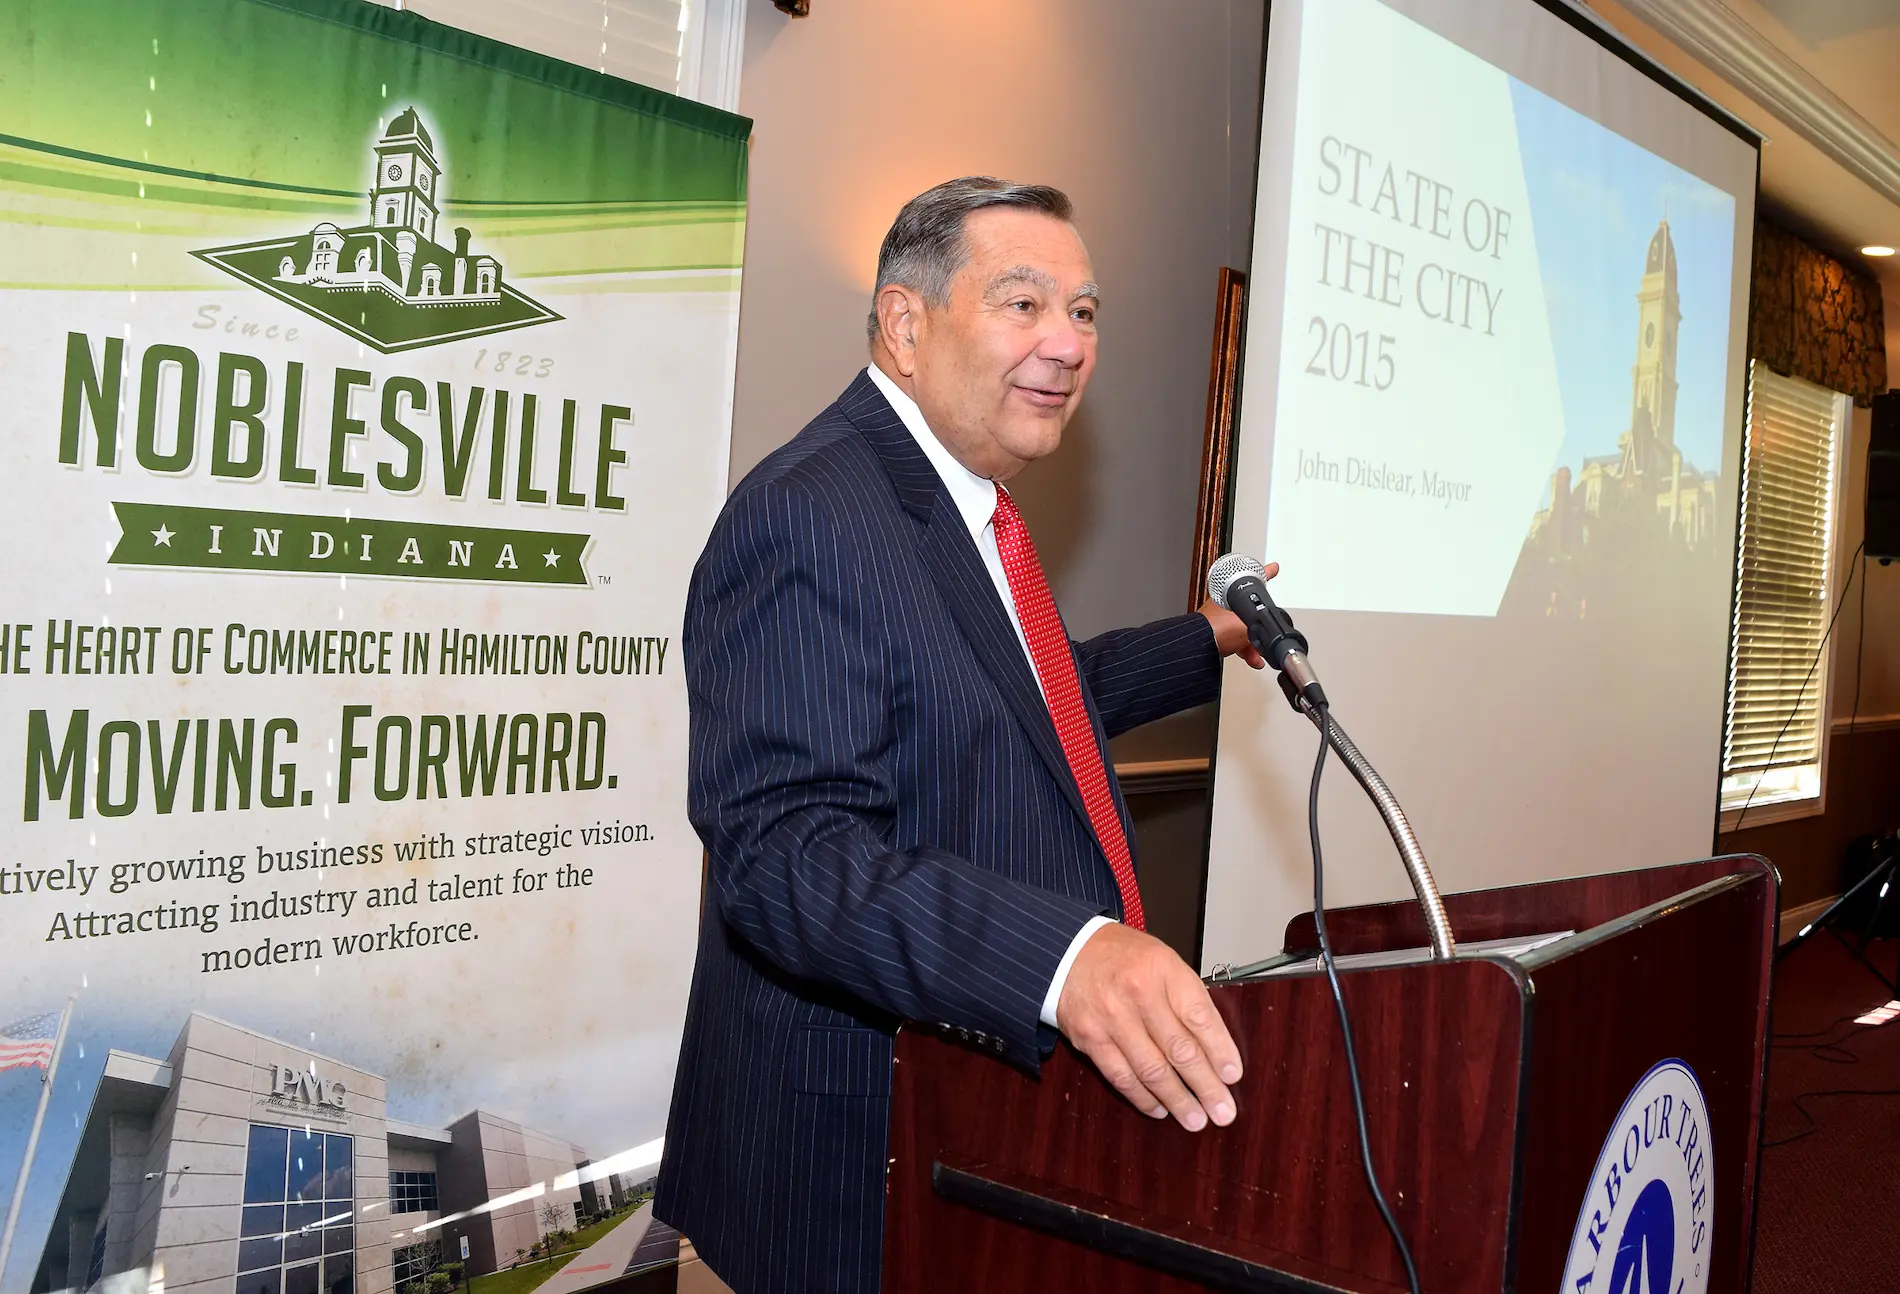 Mayor Delivers 2015 Annual ‘State of the City’ Address